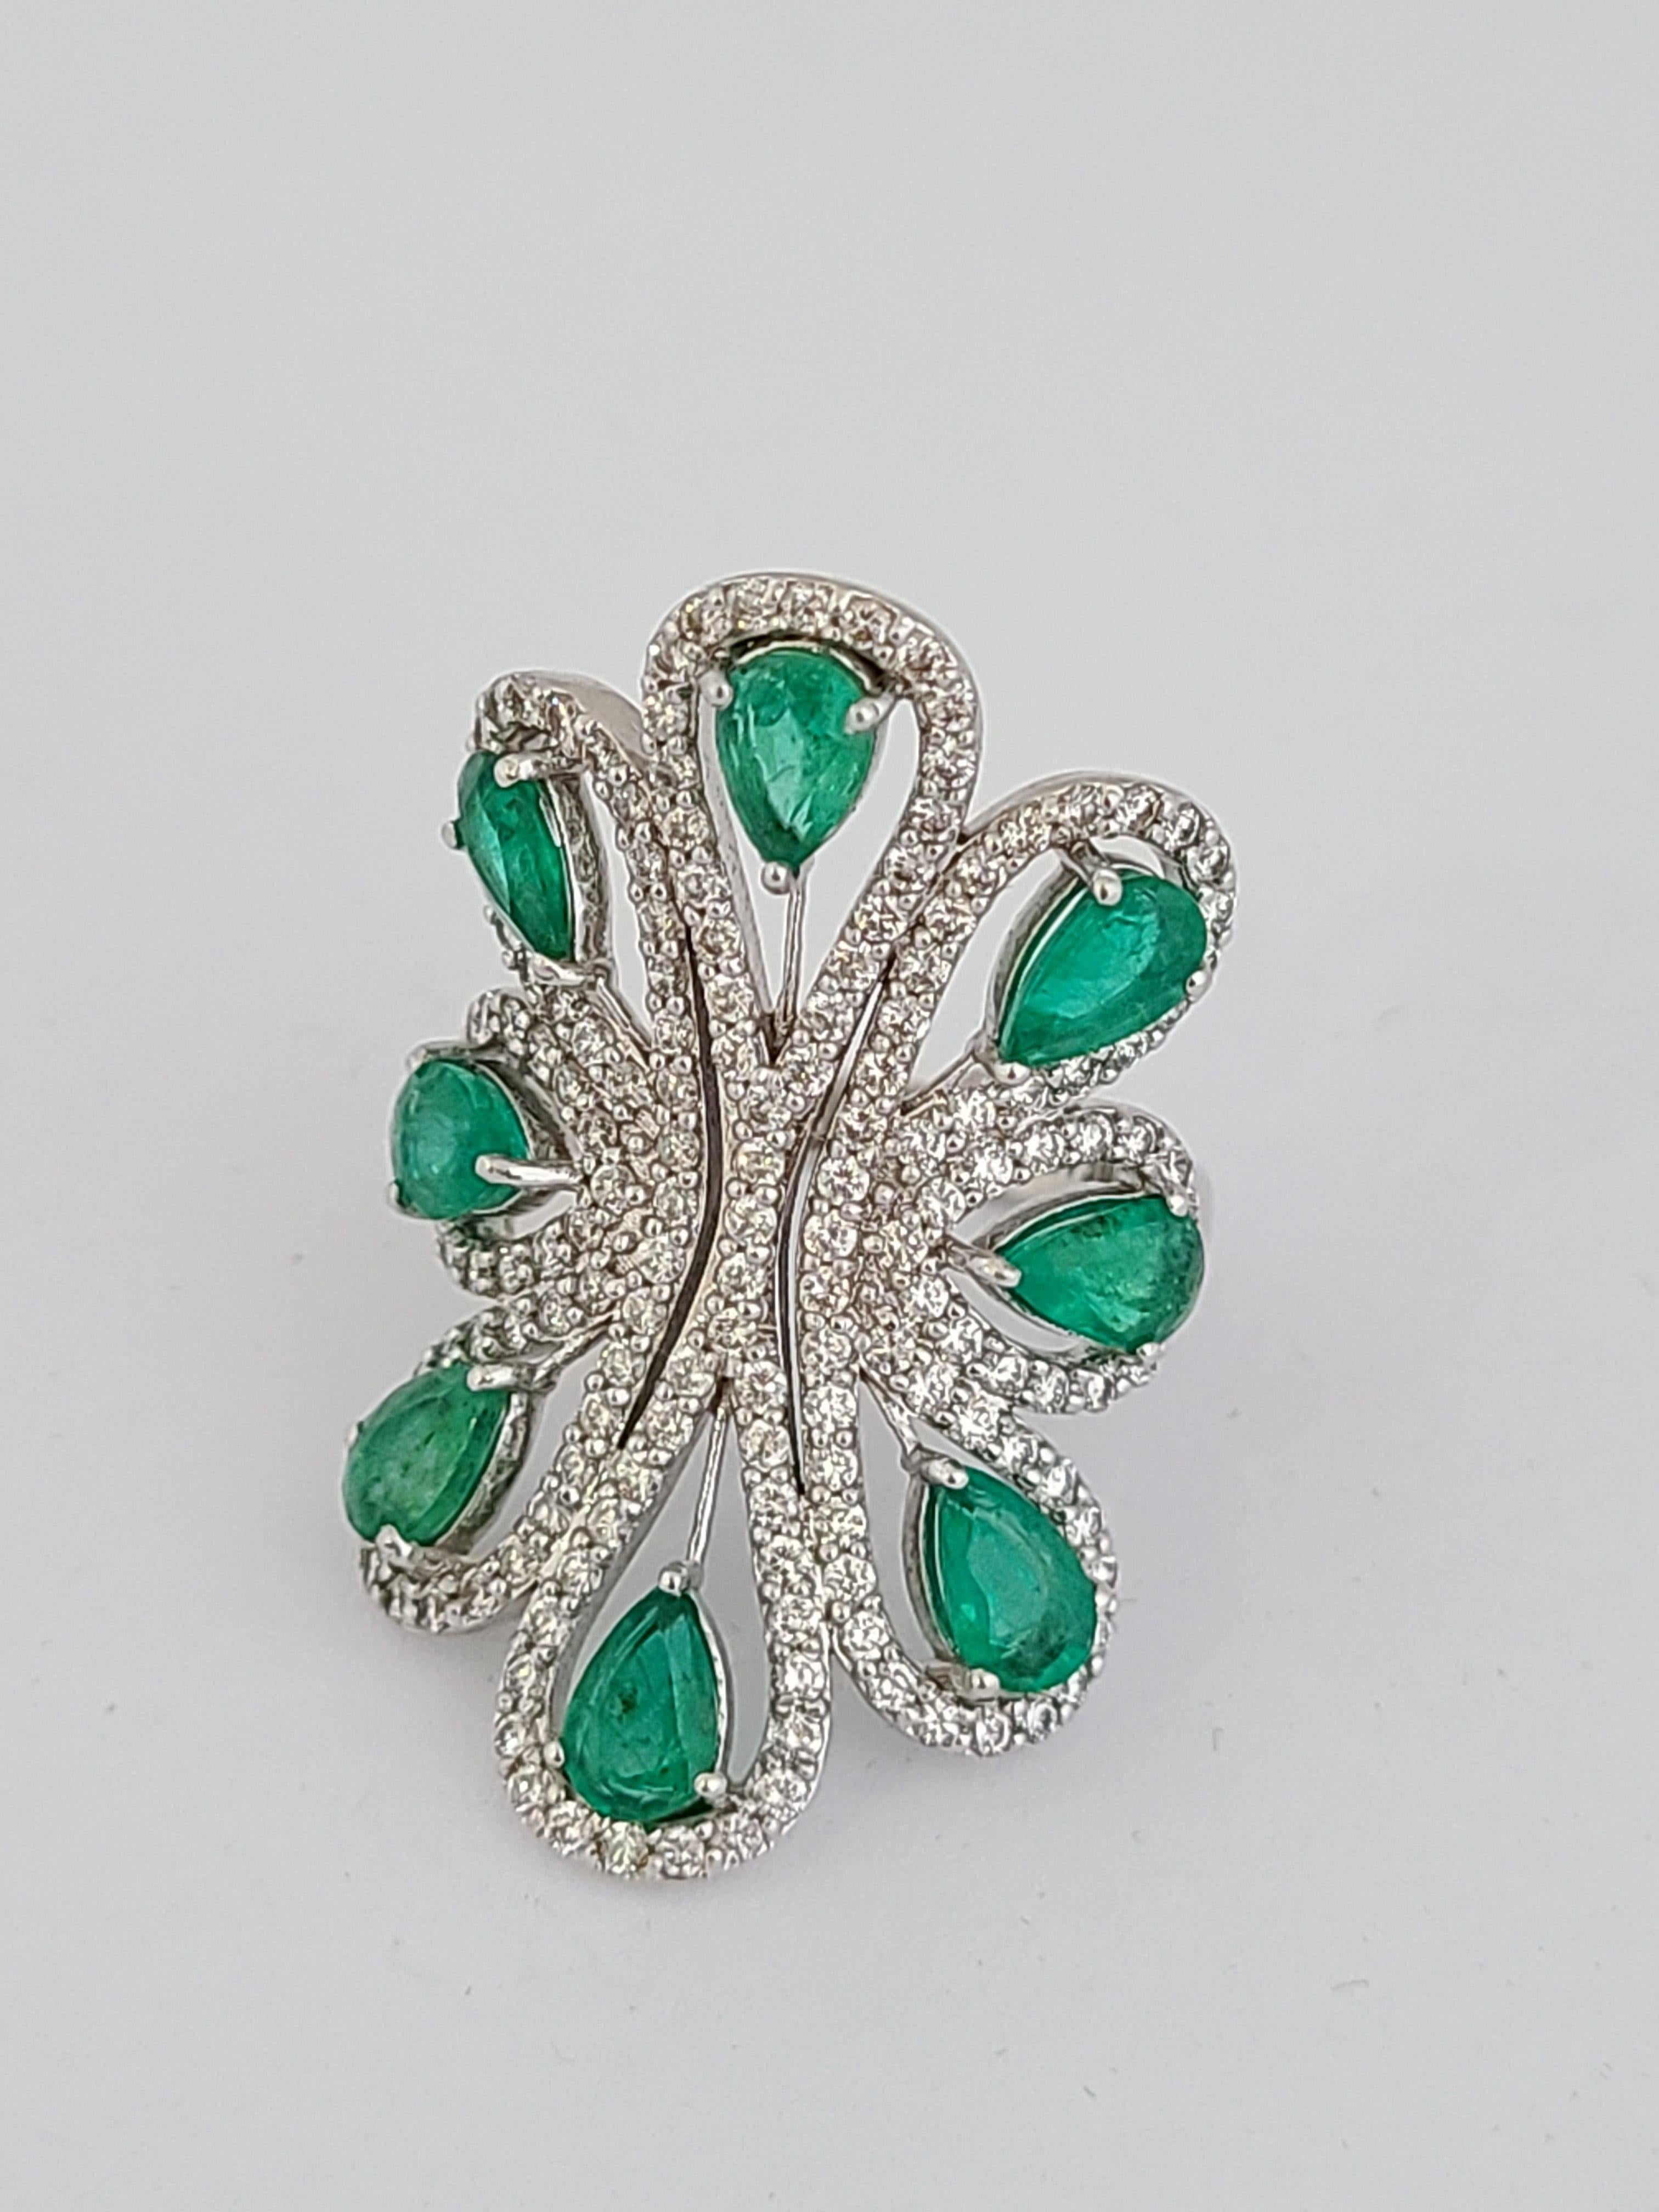 Pear Cut Natural Emerald Ring Set in 18 Karat Gold with Diamonds